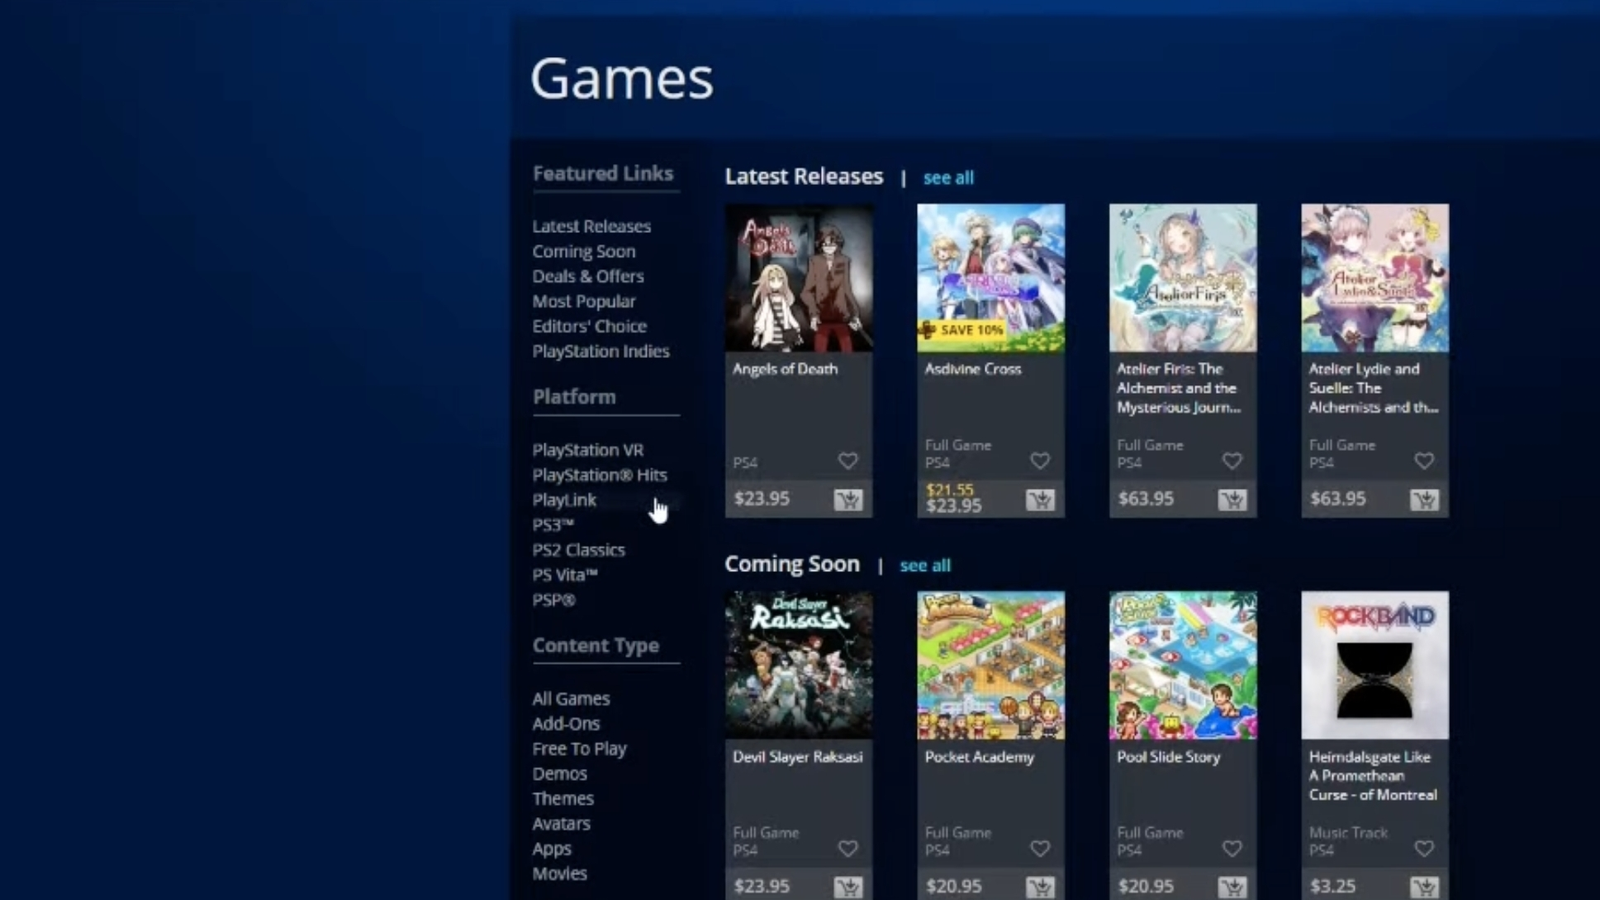 How to Play PS3 Games on a PS4 With PlayStation Now